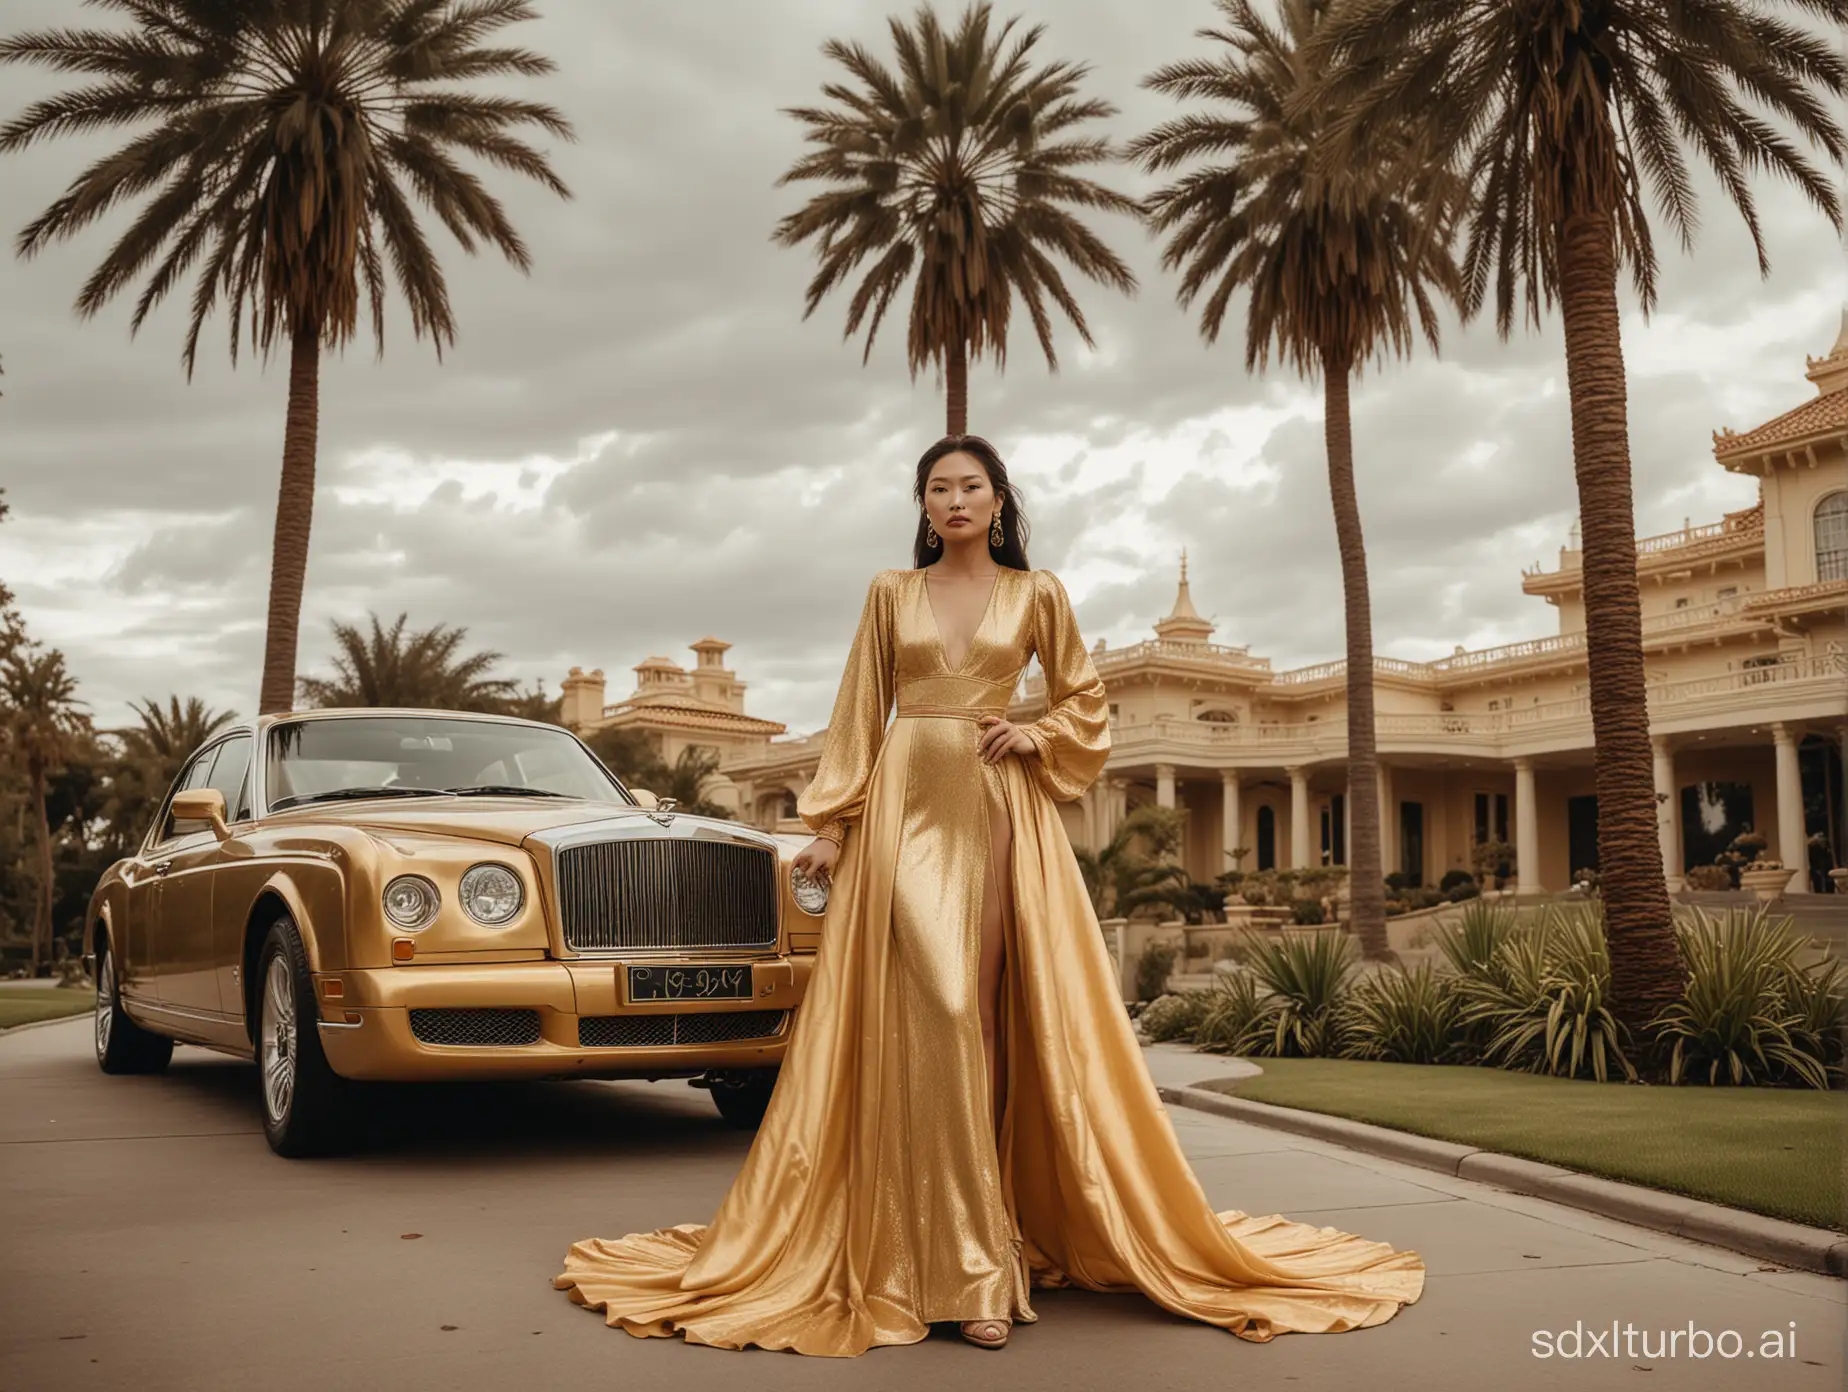 photo of a high fashion mongolian woman wearing a golden glowy maxi dress, surreal, bentley, real big glow, Bel Air mansion, old money aesthetic, cloudy day, palmtree